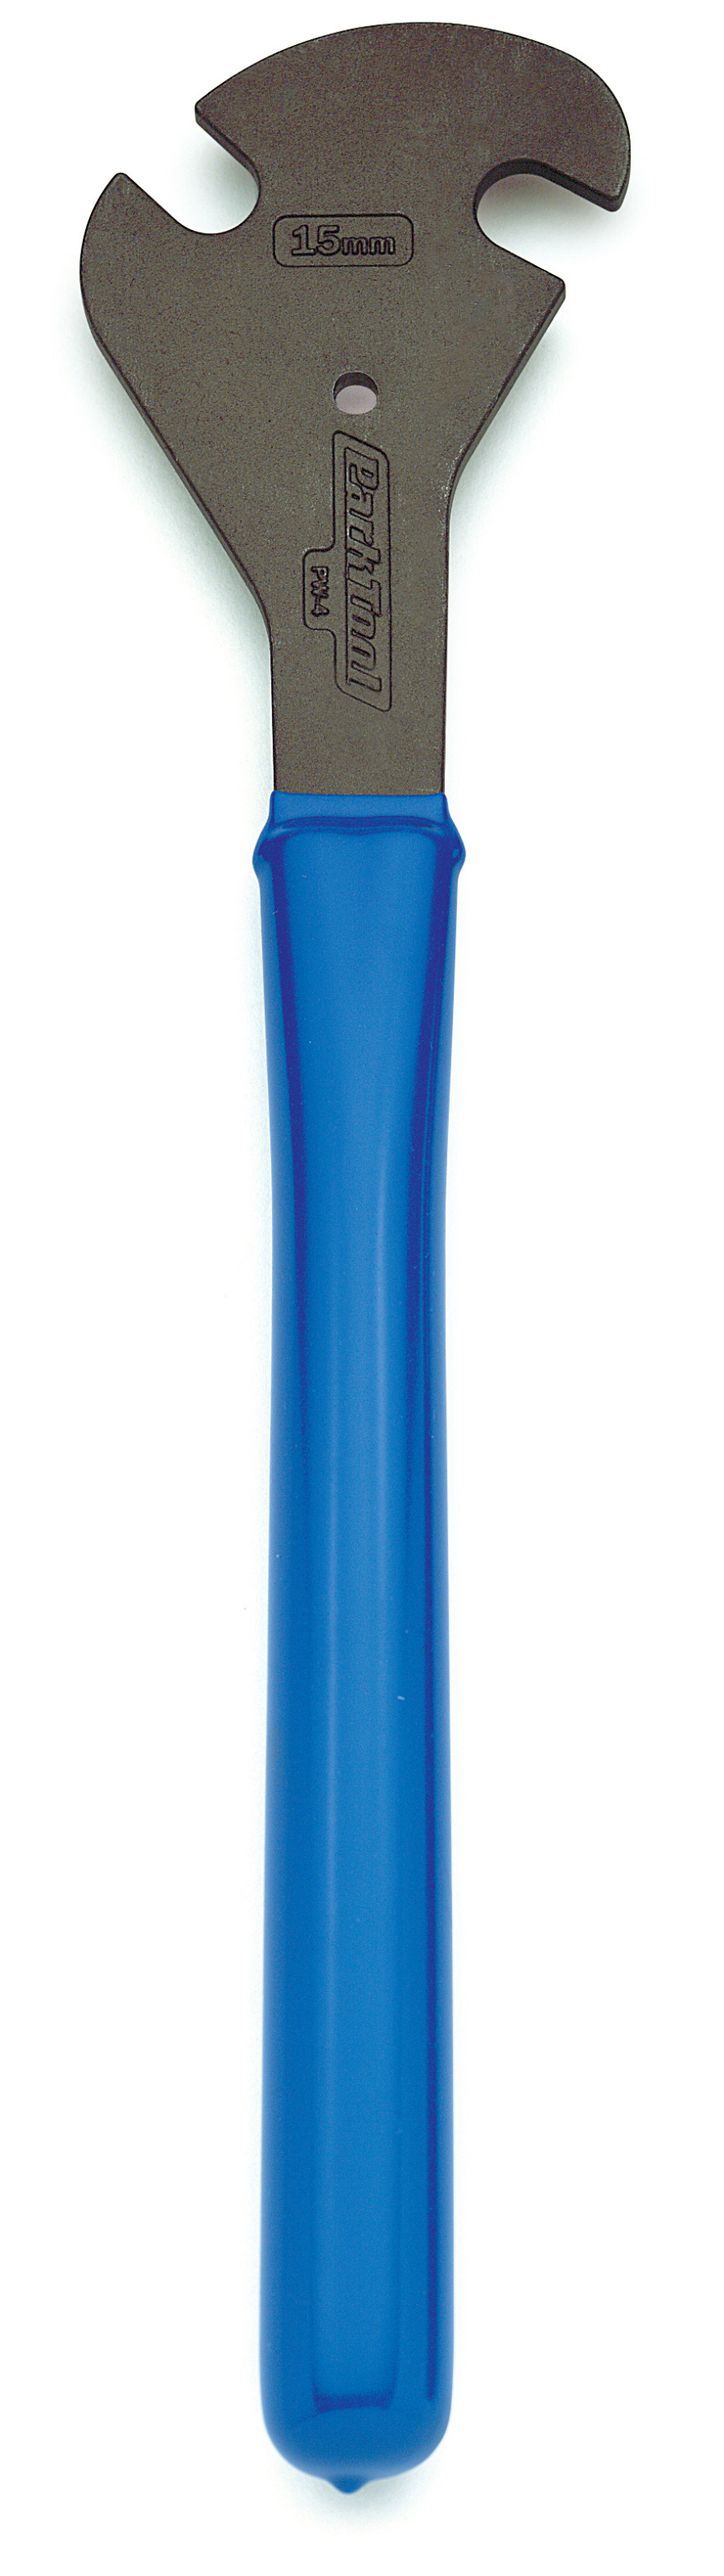 The Park Tool PW-4 Professional Pedal Wrench, enlarged